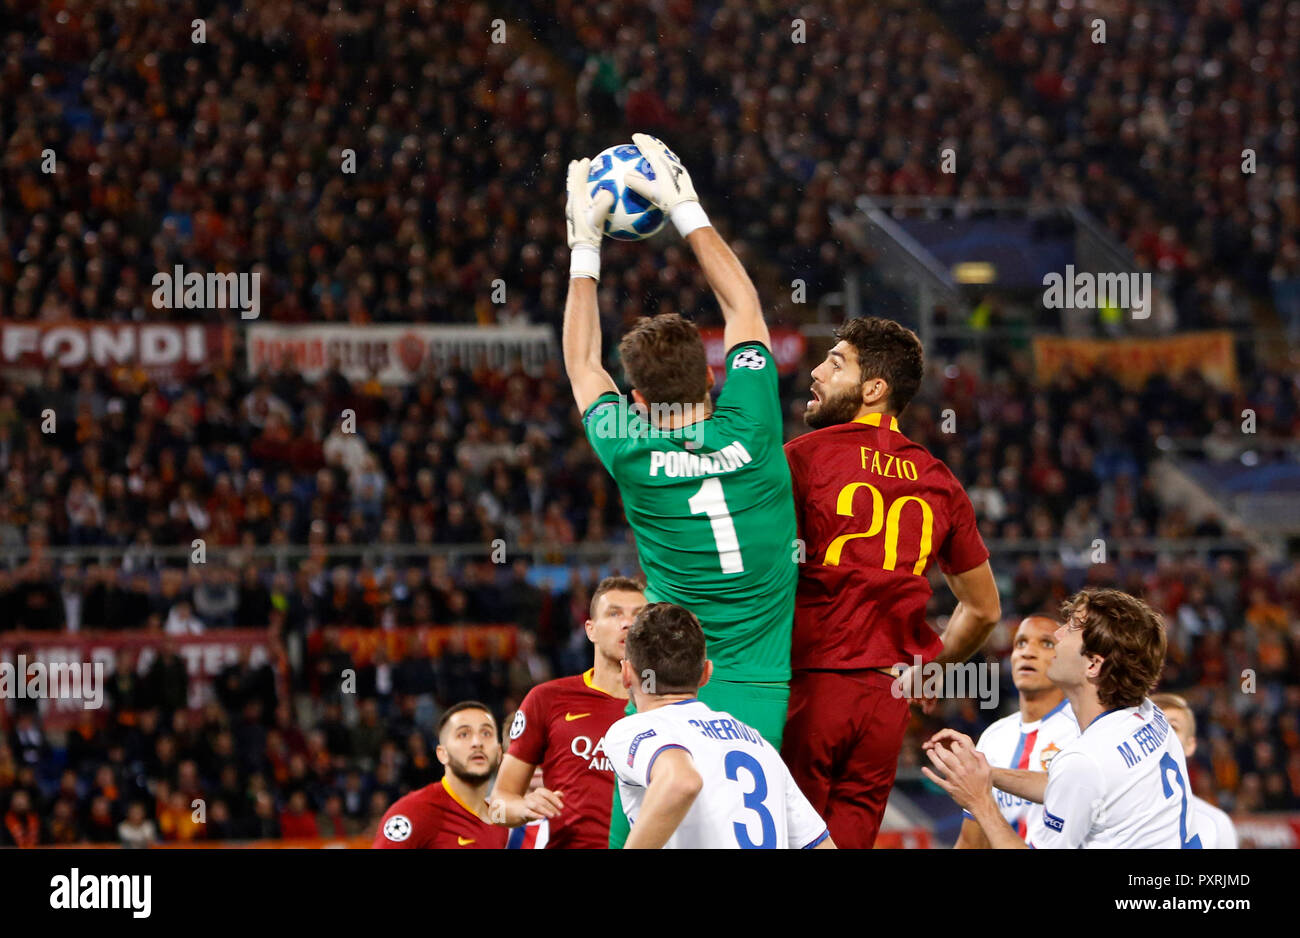 Rome, Italy, 23rd October, 2018. CSKA Moscow's goalkeeper Ilya Pomazun, top left, grabs the ball past Roma's Federico Fazio during the Champions League Group G soccer match between Roma and CSKA Moscow at the Olympic Stadium. Roma won 3-0. © Riccardo De Luca UPDATE IMAGES/ Alamy Live News Stock Photo